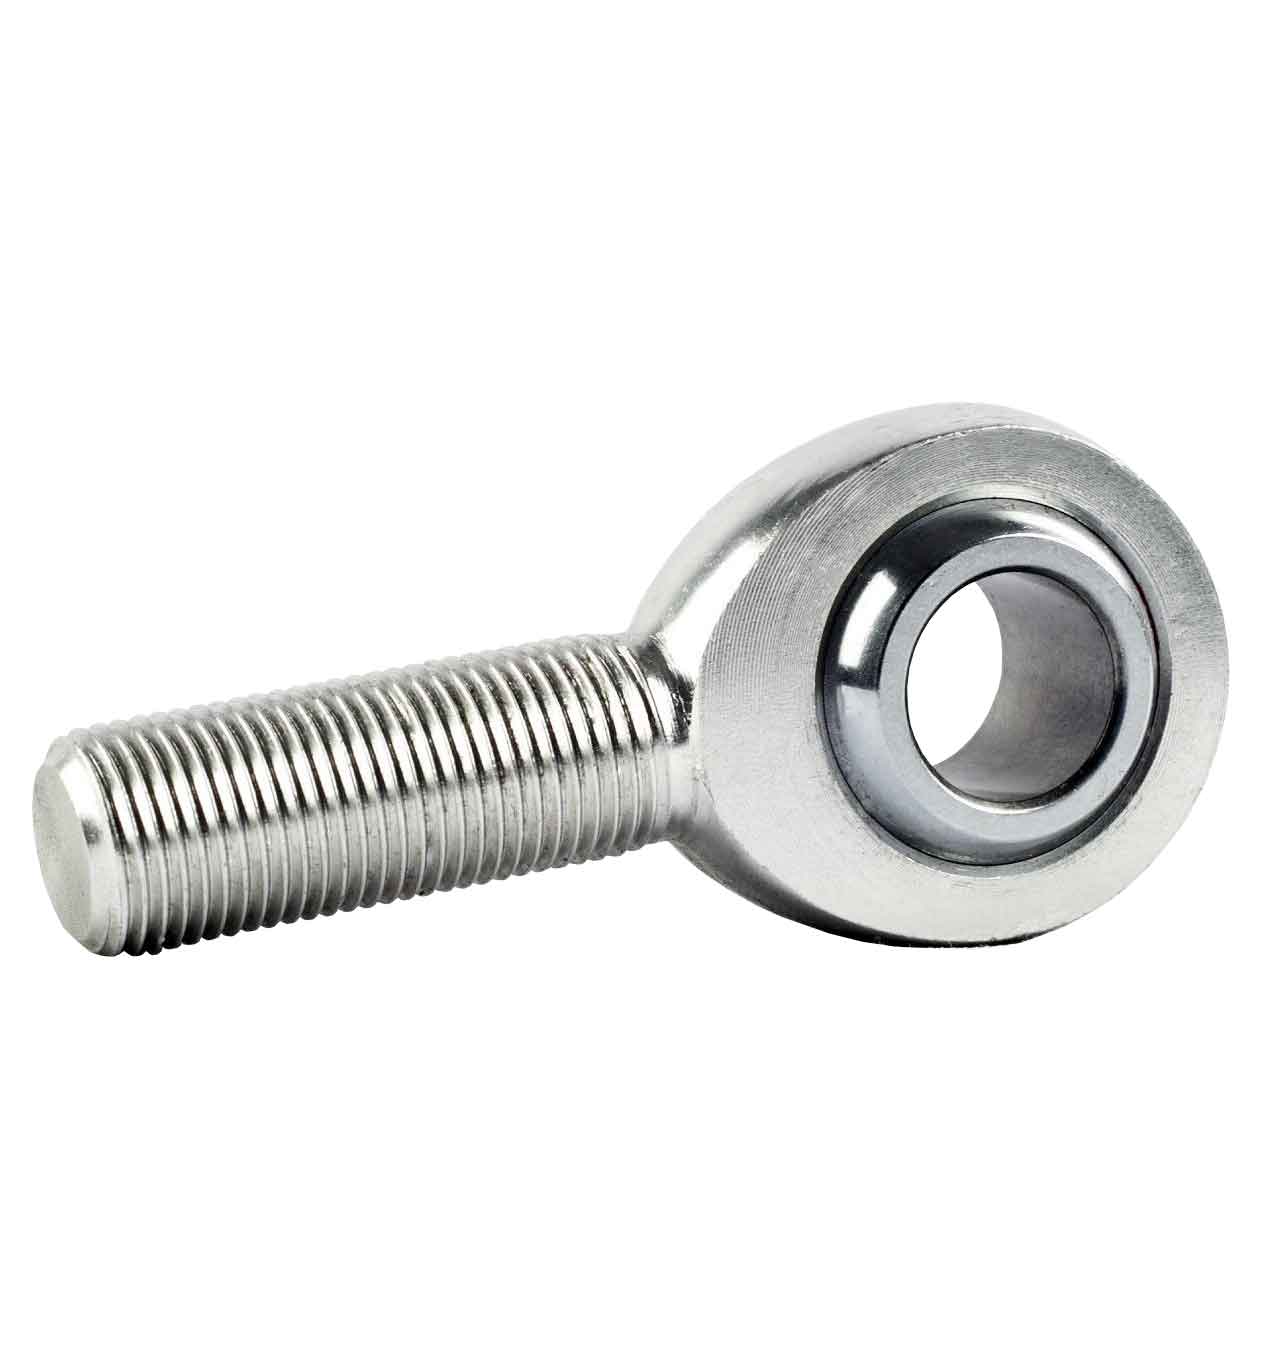 SS-POS12 GENERIC 12mm M12X1.75 STAINLESS STEEL MALE ROD END BEARING Thumbnail